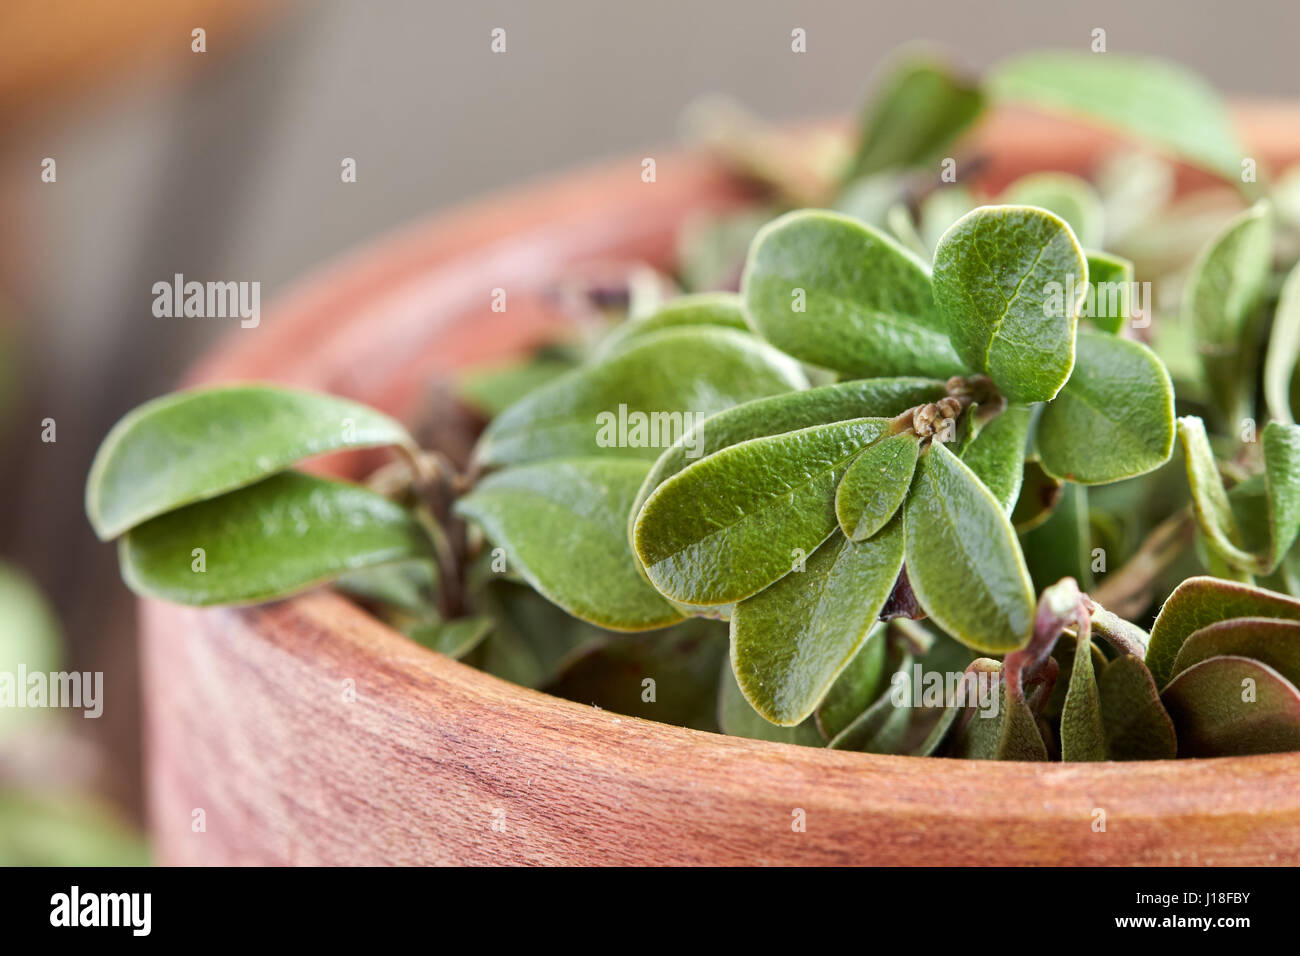 Bearberry leaves (medicinal plant Arctostaphylos uva-ursi) in wooden bowl Stock Photo